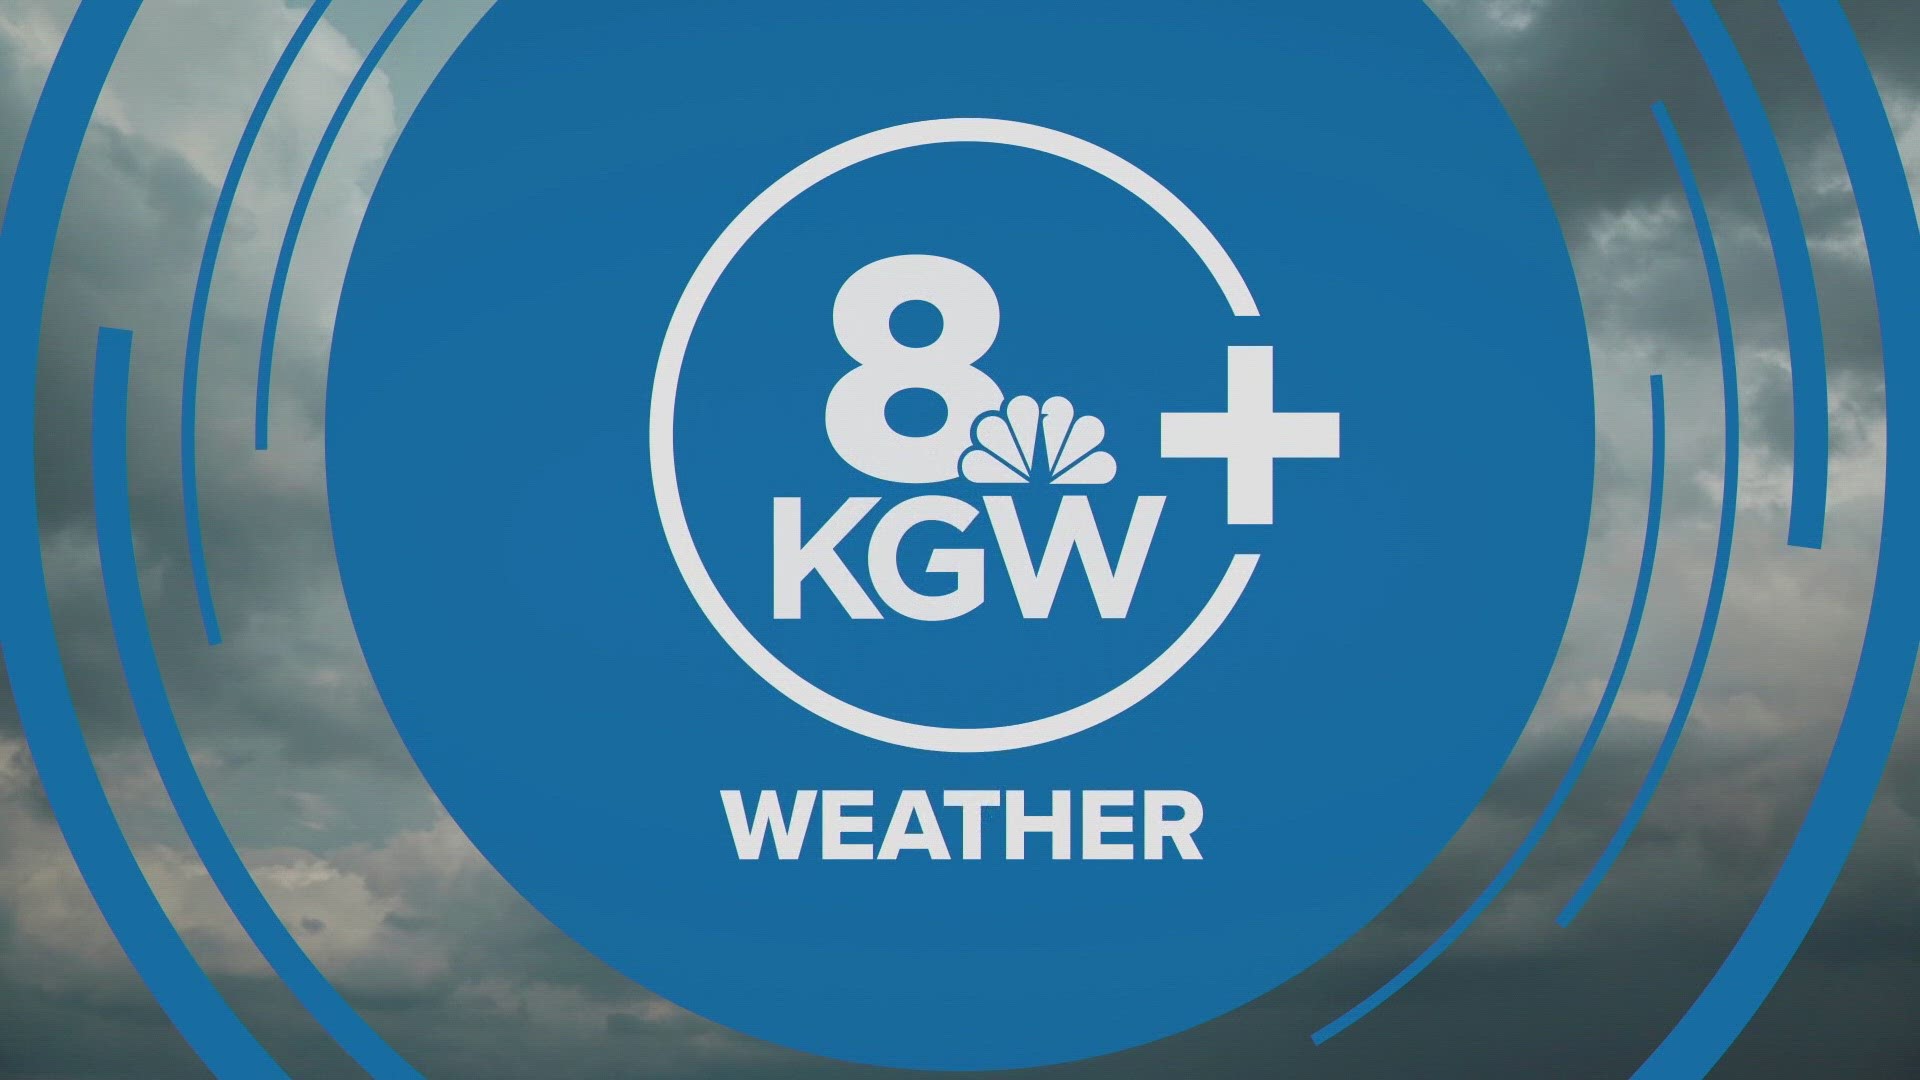 KGW issued Weather Impact Alert Days for Friday, July 5 through Sunday, July 7 for temperatures that could get close to 100 degrees and challenge record highs.